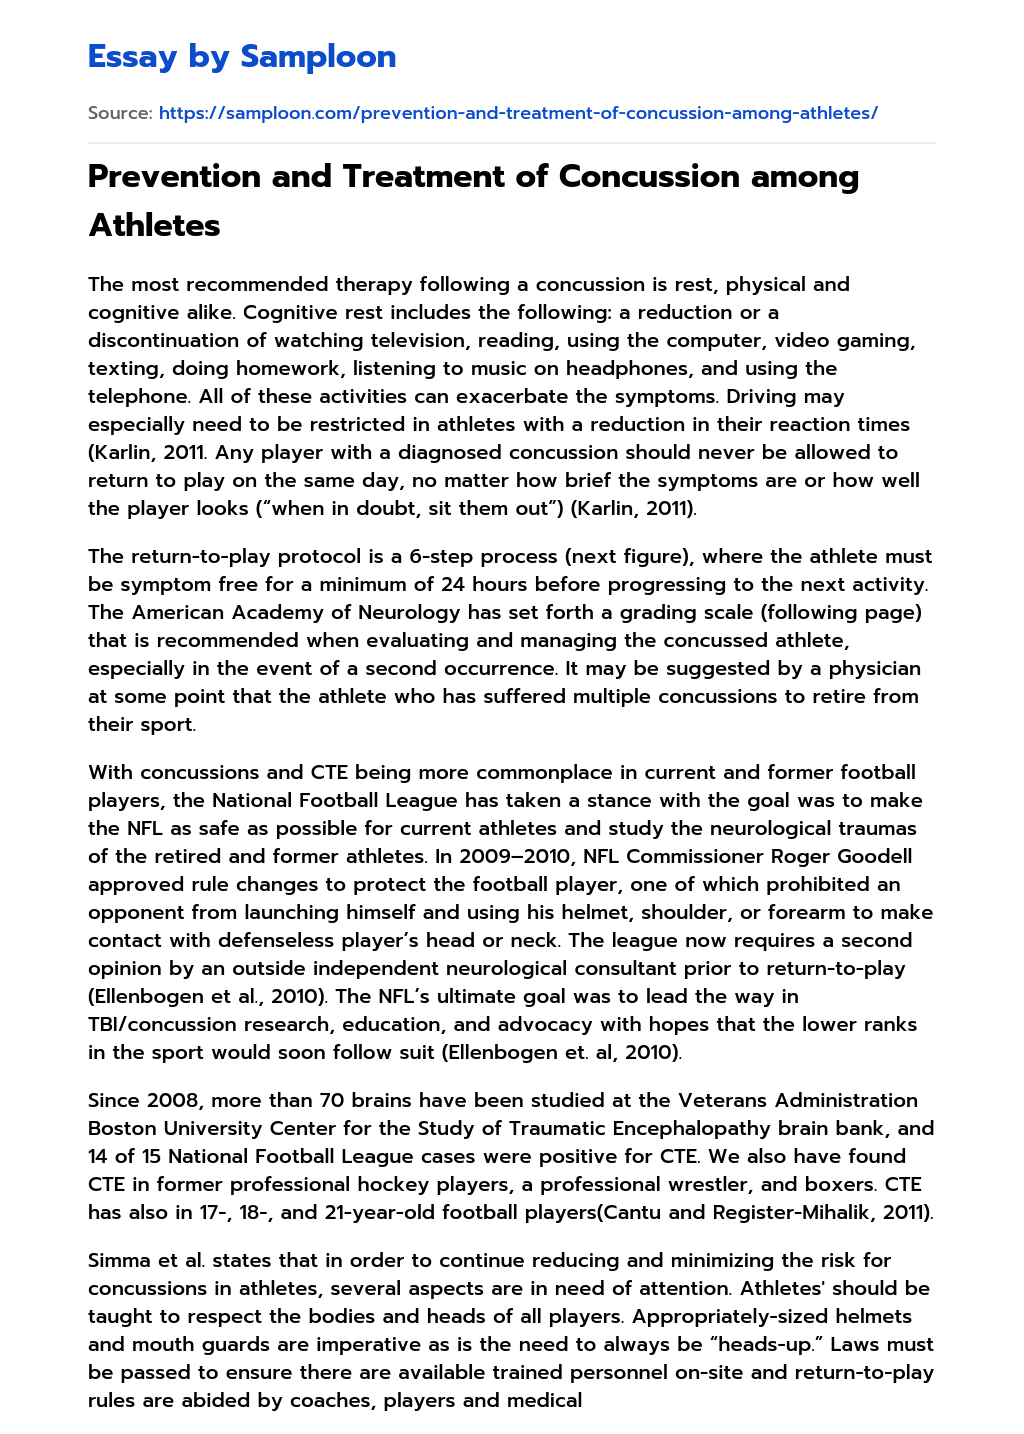 Prevention and Treatment of Concussion among Athletes essay